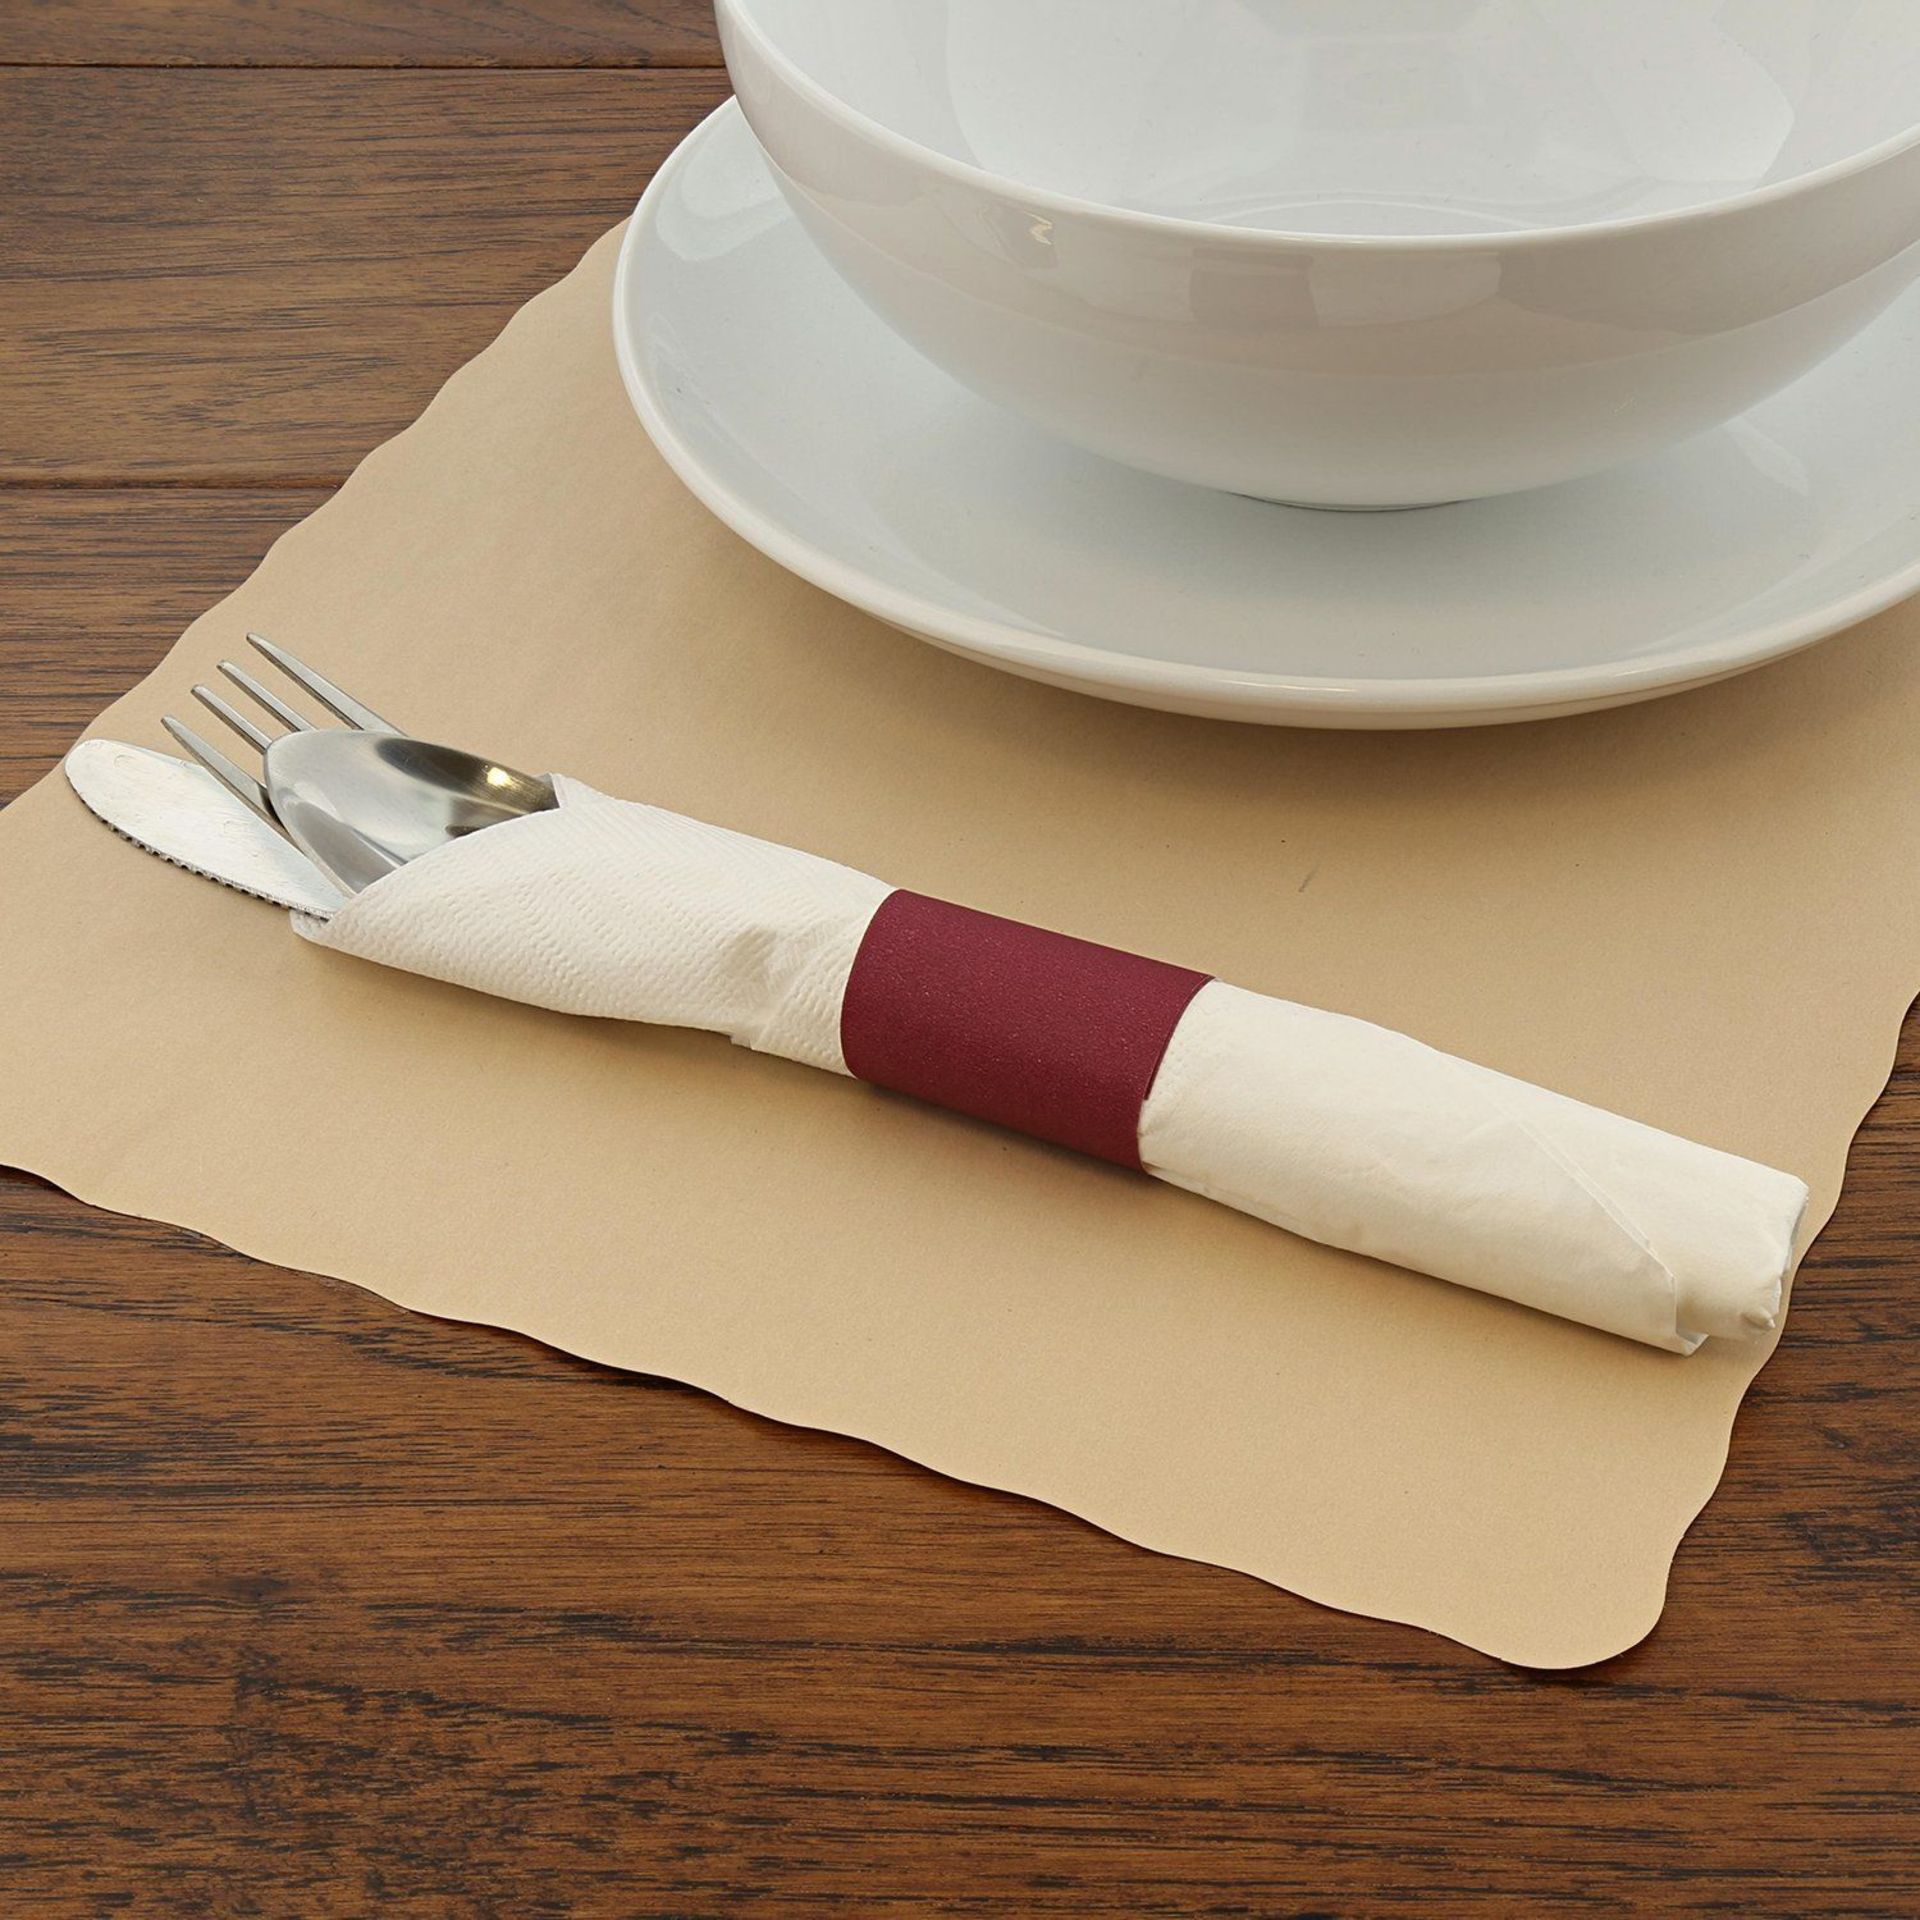 12,500 x Burgundy Royal Napkin Bands - Includes 5 x Boxes of 2,500 - Product Code RNB20MN - Brand